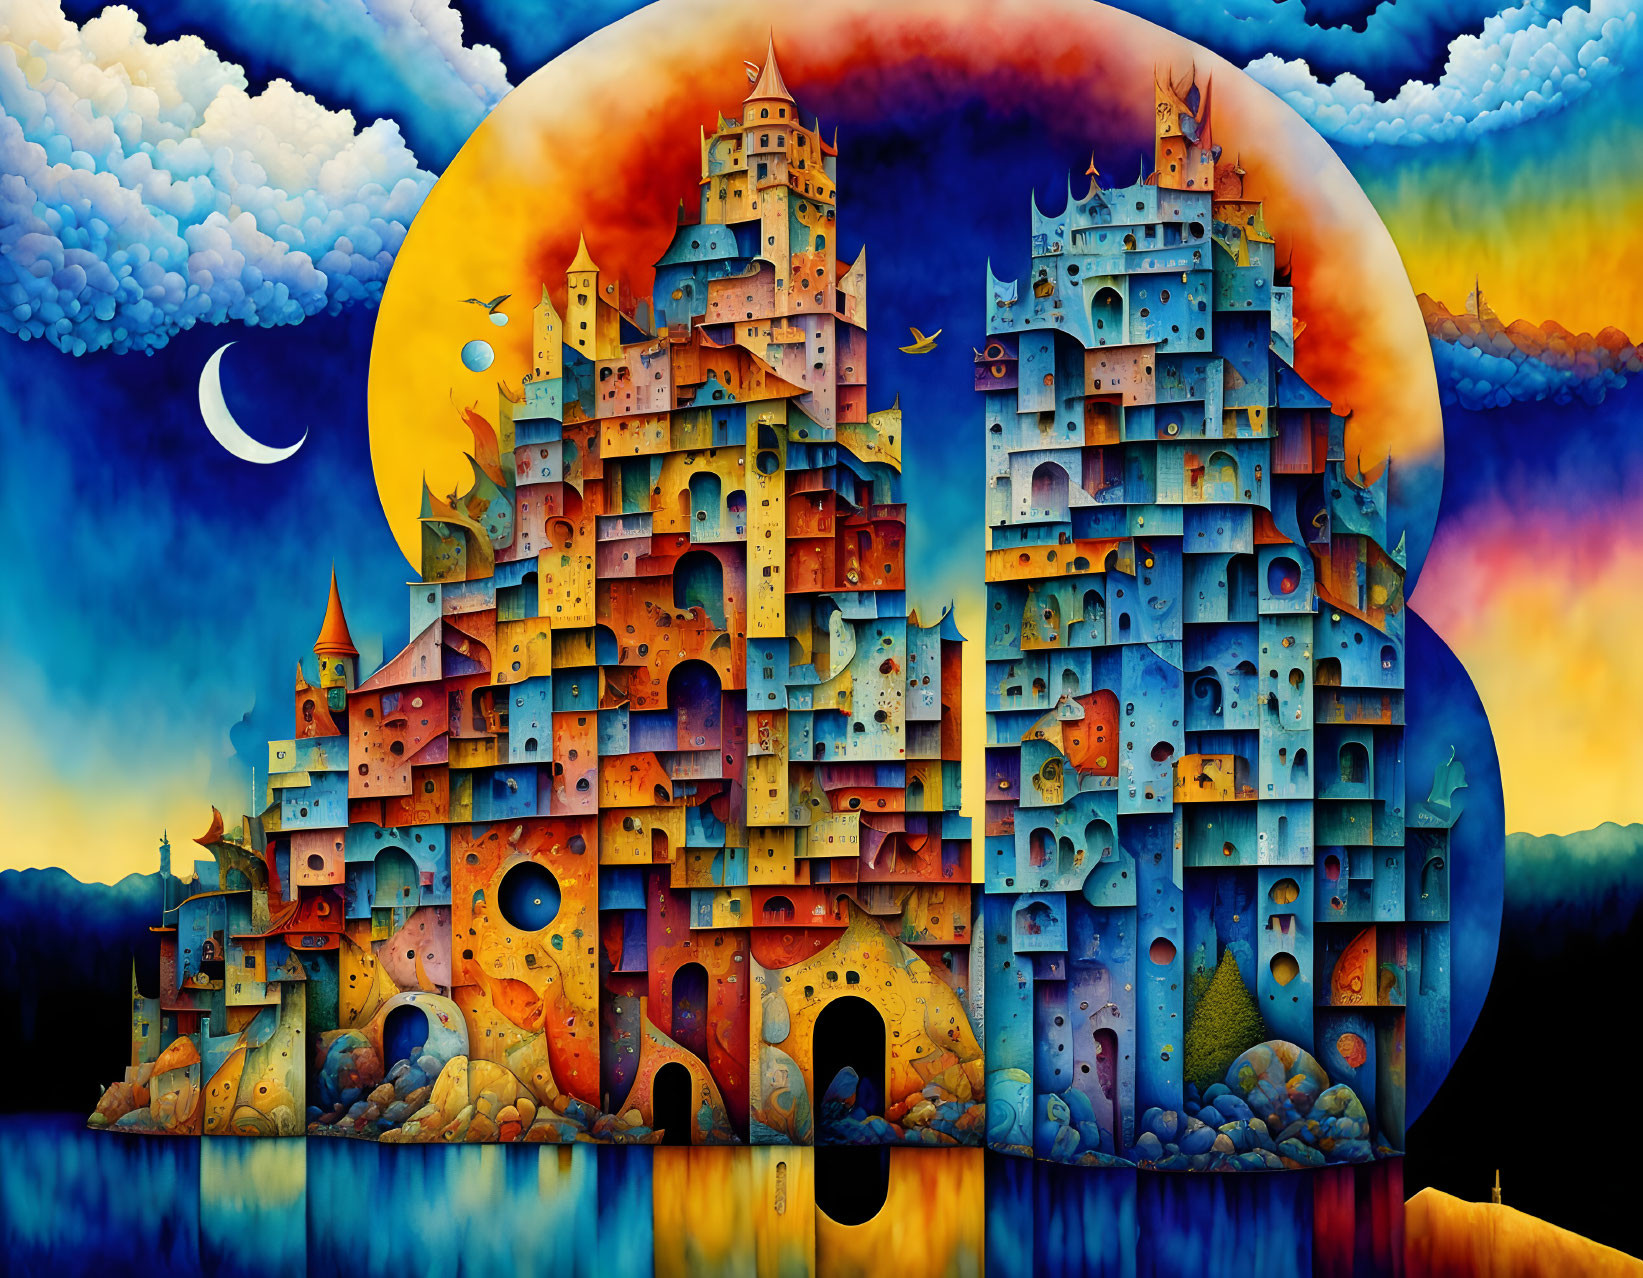 Whimsical castle city painting with day-night sky contrast